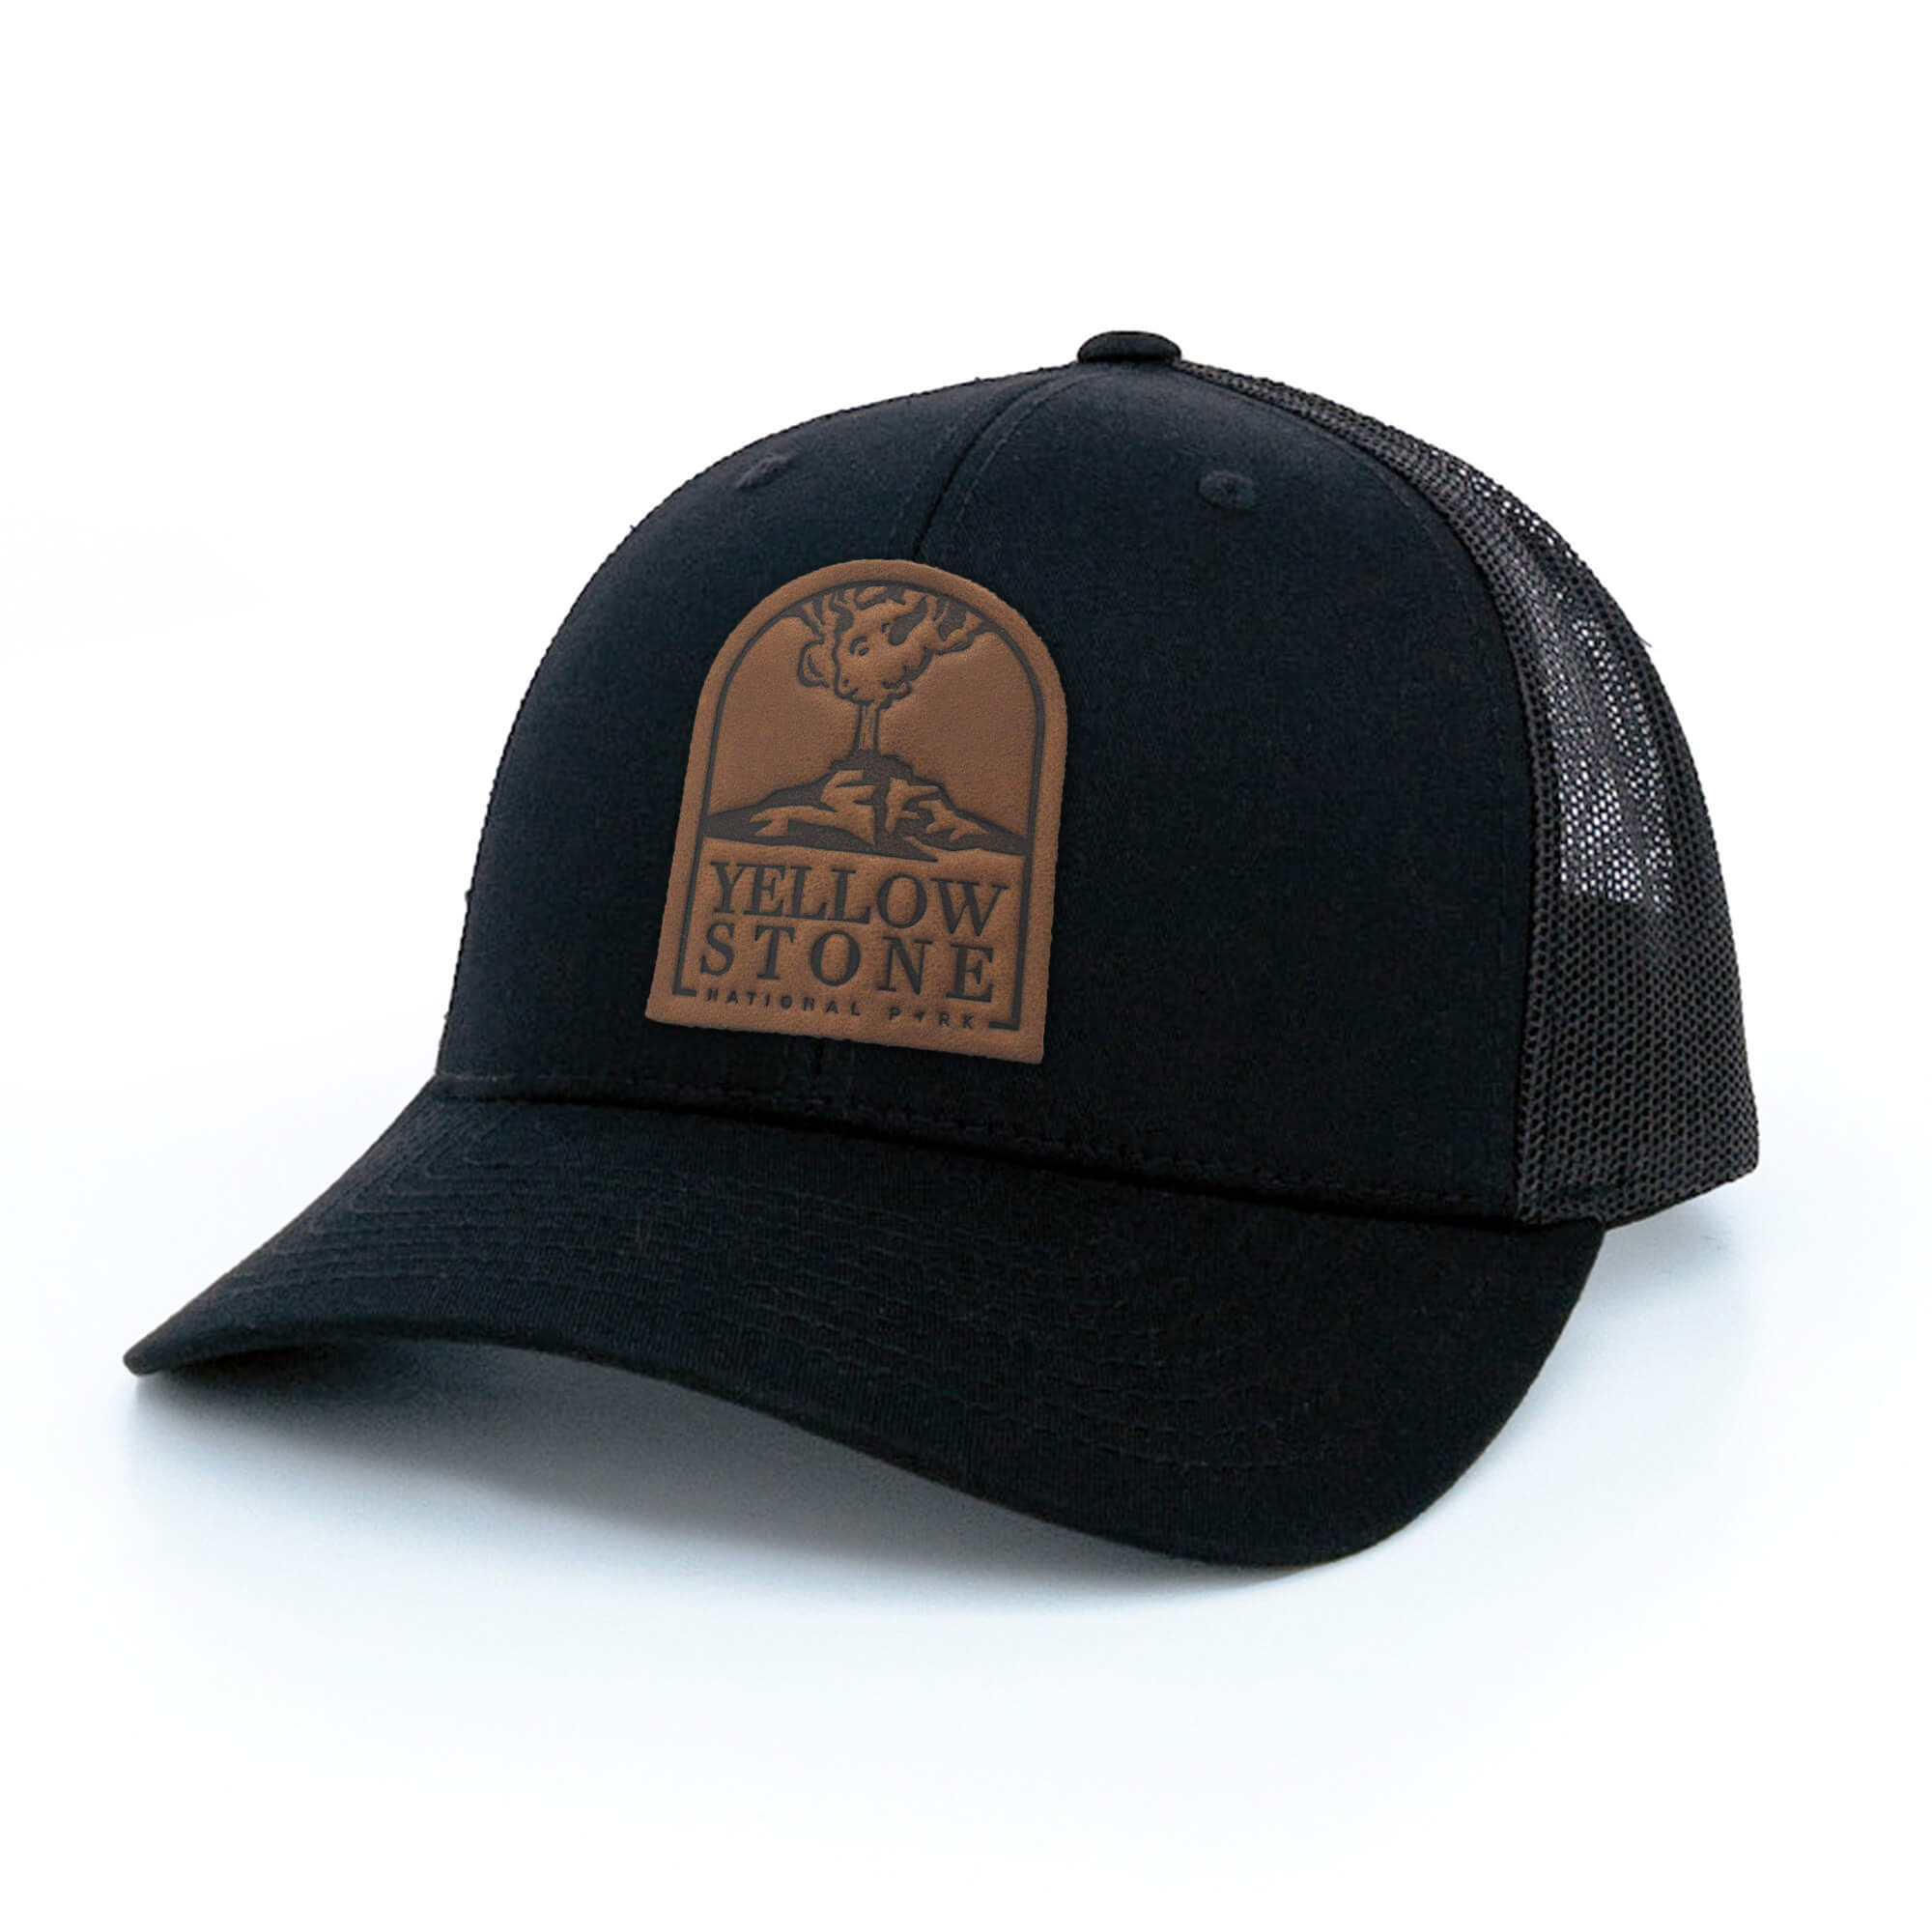 Black trucker hat with full-grain leather patch of Yellowstone National Park | BLACK-007-005, CHARC-007-005, NAVY-007-005, HGREY-007-005, MOSS-007-005, BROWN-007-005